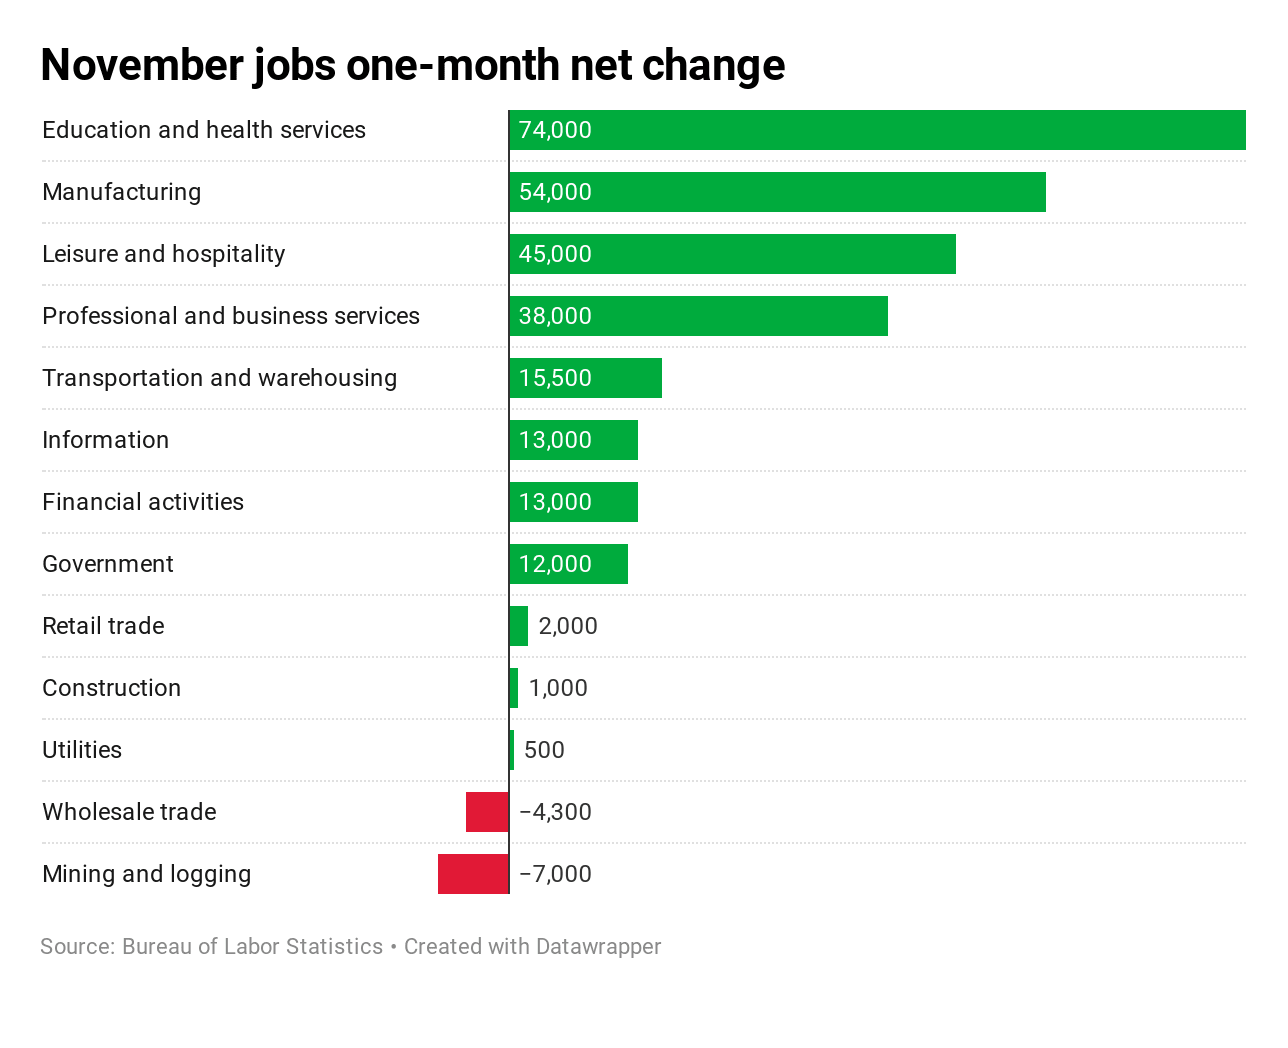 This is the place the roles are for November 2019 — in a single chart